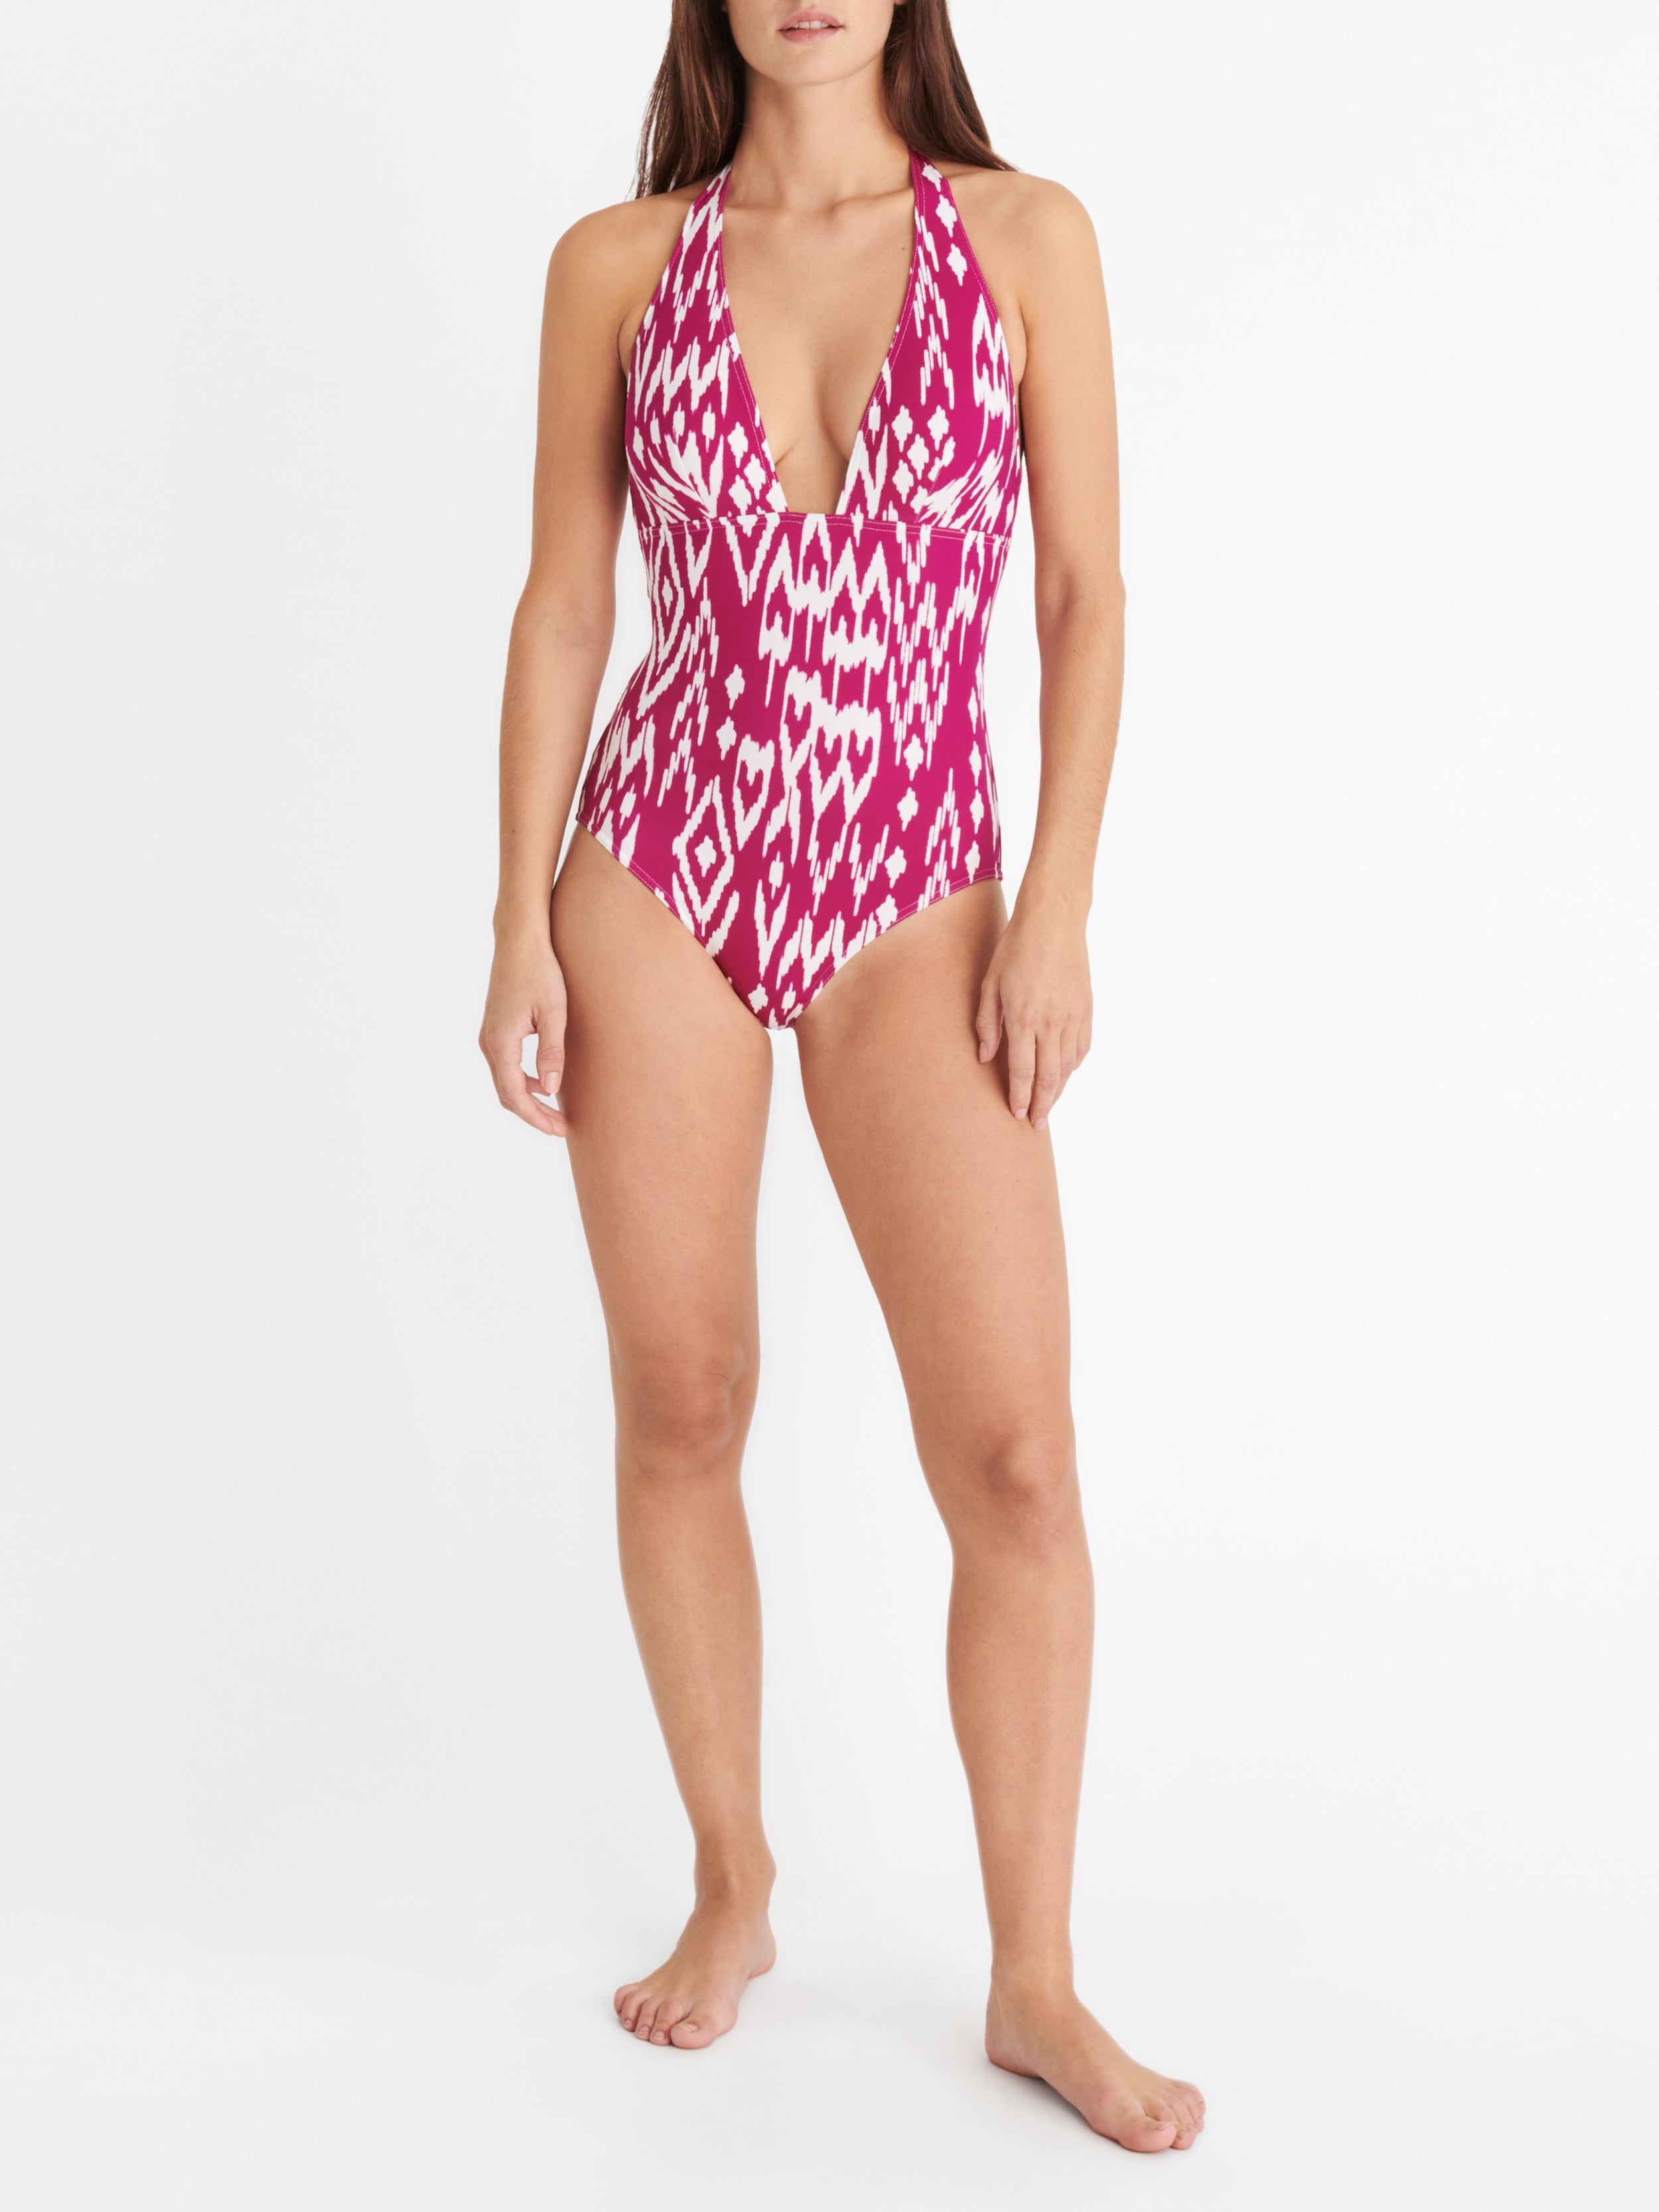 Sunny triangle swimsuit - Eres